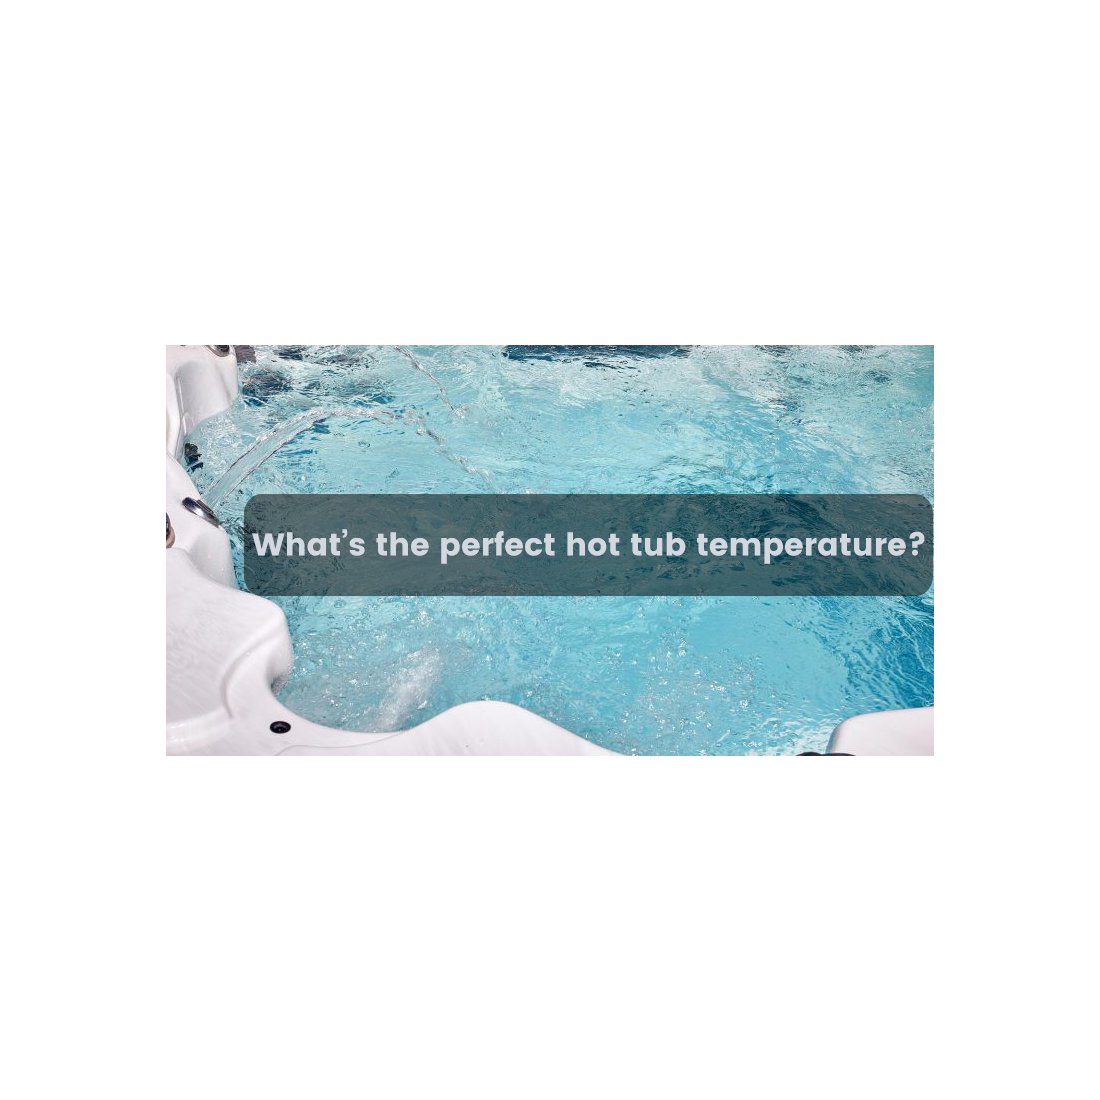 What's the best hot tub temperature?